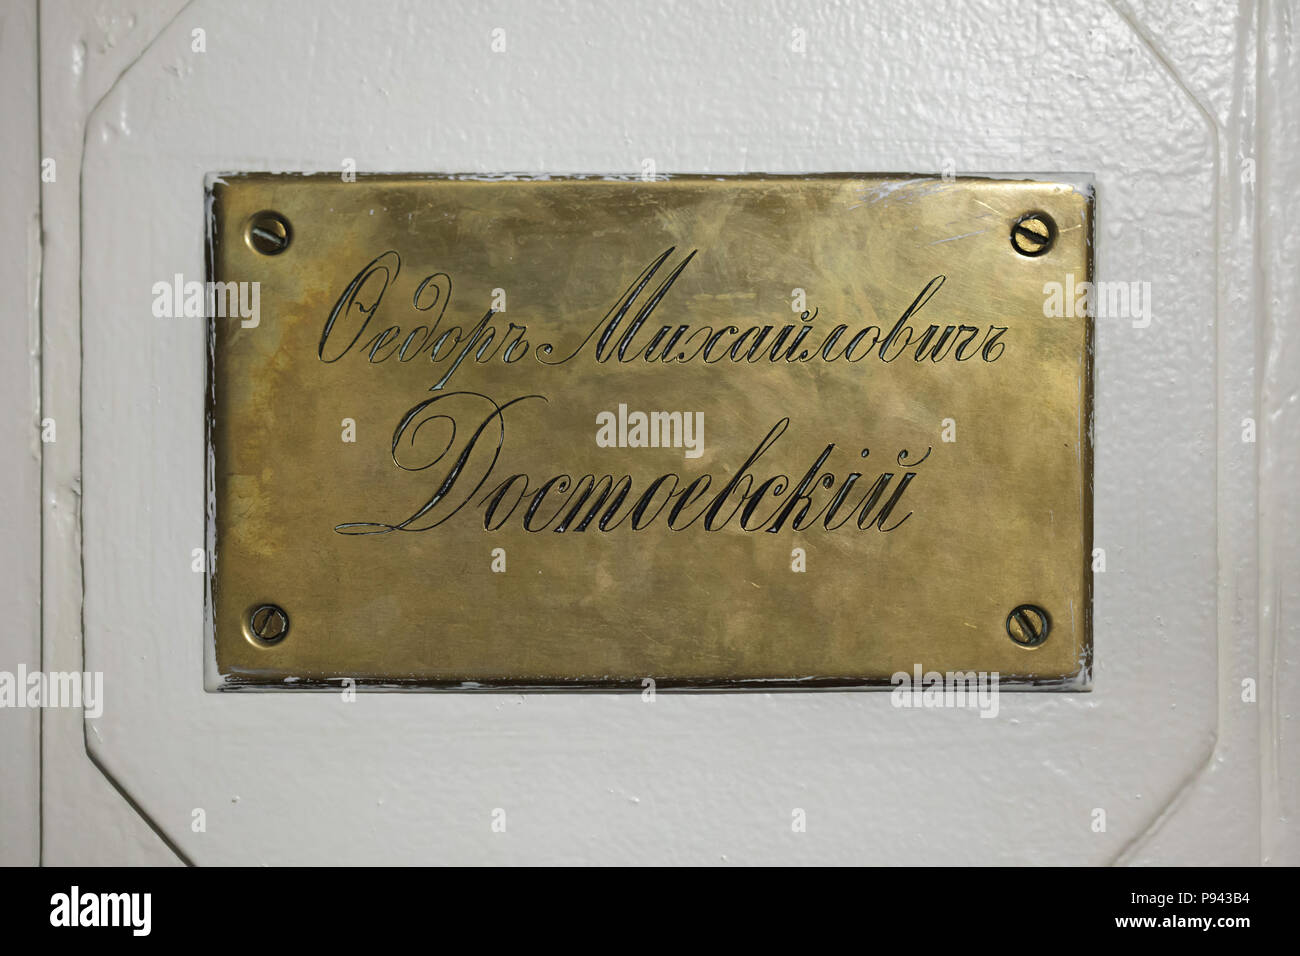 Brass name plate on the entrance door of the memorial apartment of Russian novelist Fyodor Dostoevsky in Kuznechny Lane in Saint Petersburg, Russia. Fyodor Dostoevsky lived in the apartment twice during his life: first for a short period in 1846 in the beginnings of his career, and later from October 1878 until his death in February 1881. He wrote his last novel The Brothers Karamazov here. The apartment is now a part of the Dostoevsky Literary Memorial Museum. Stock Photo